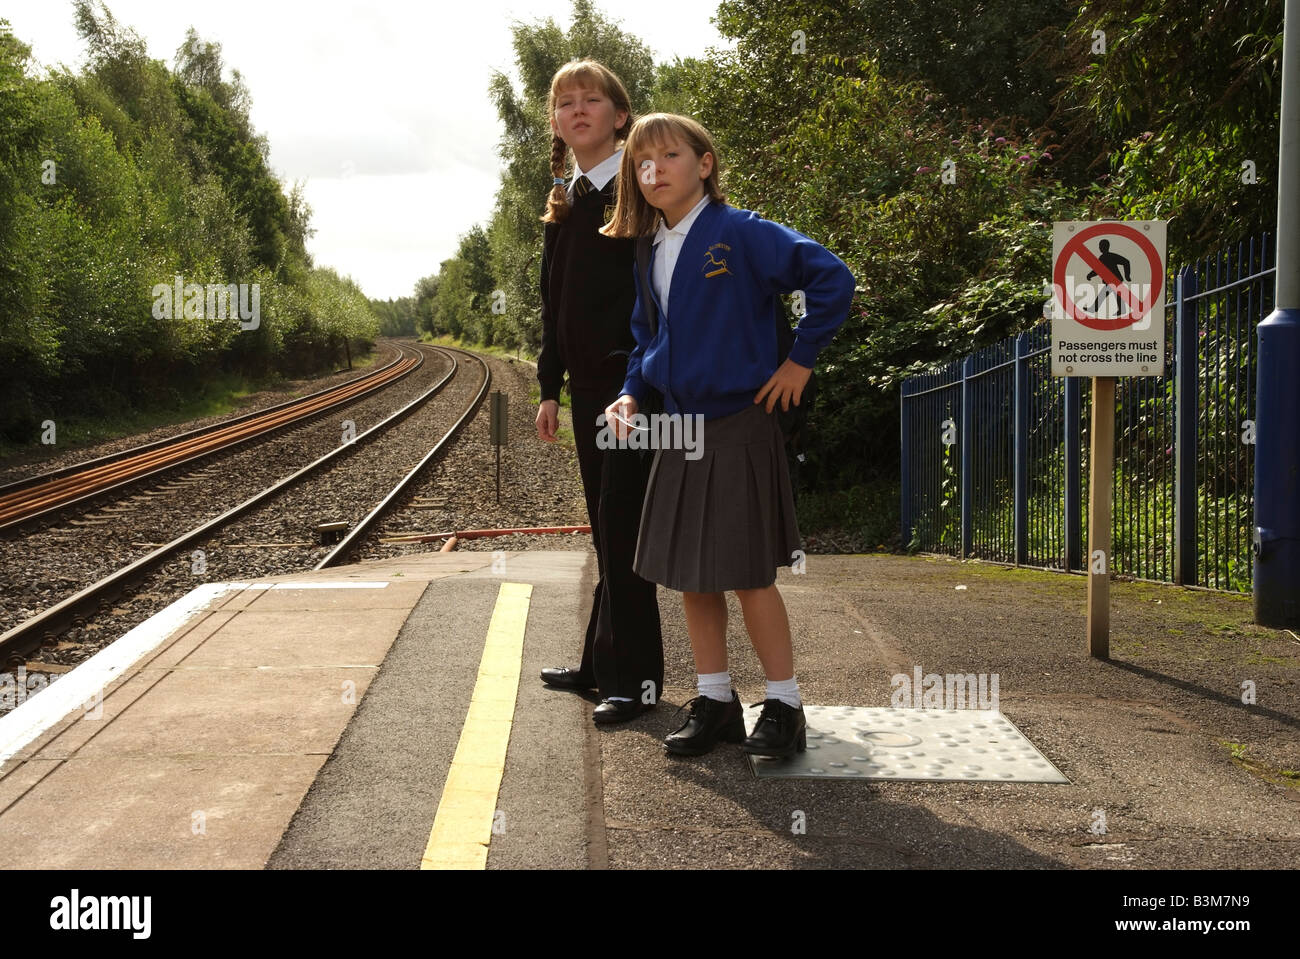 Young girls waiting for their train on a railway station platform ...